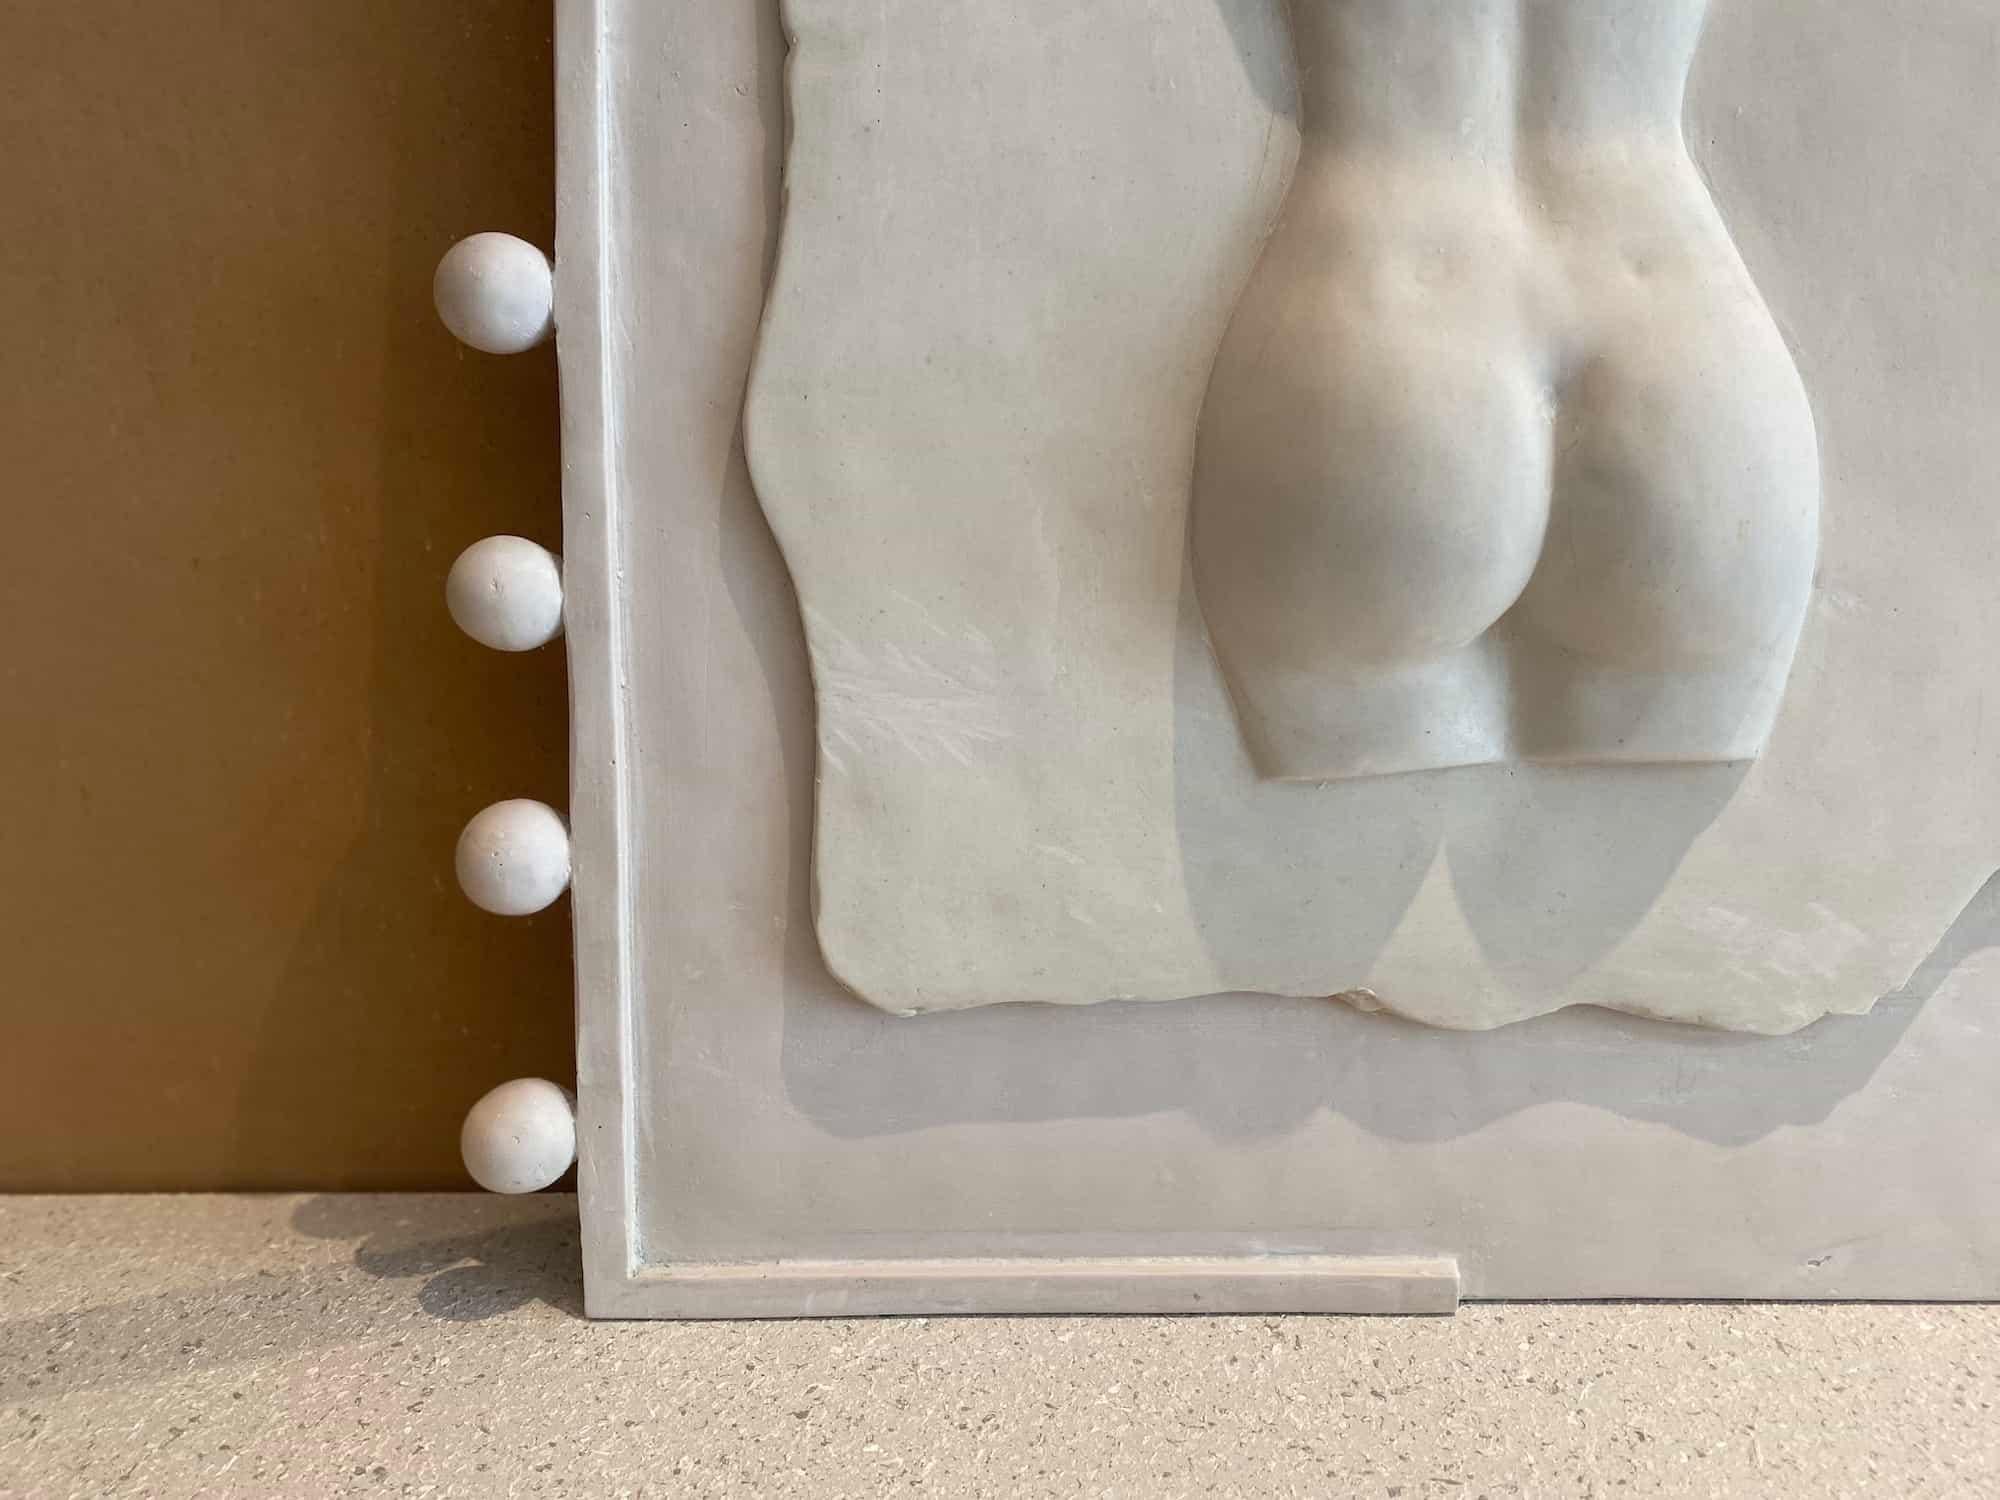 Object No.24 Wall Piece by Marcela Cure
Dimensions: W 61.5 x D 7 x H 82 cm
Materials: Resin and Stone Composite

This collection is inspired by the delicate curves of the female body, displaying soothing pieces that evoke effortless